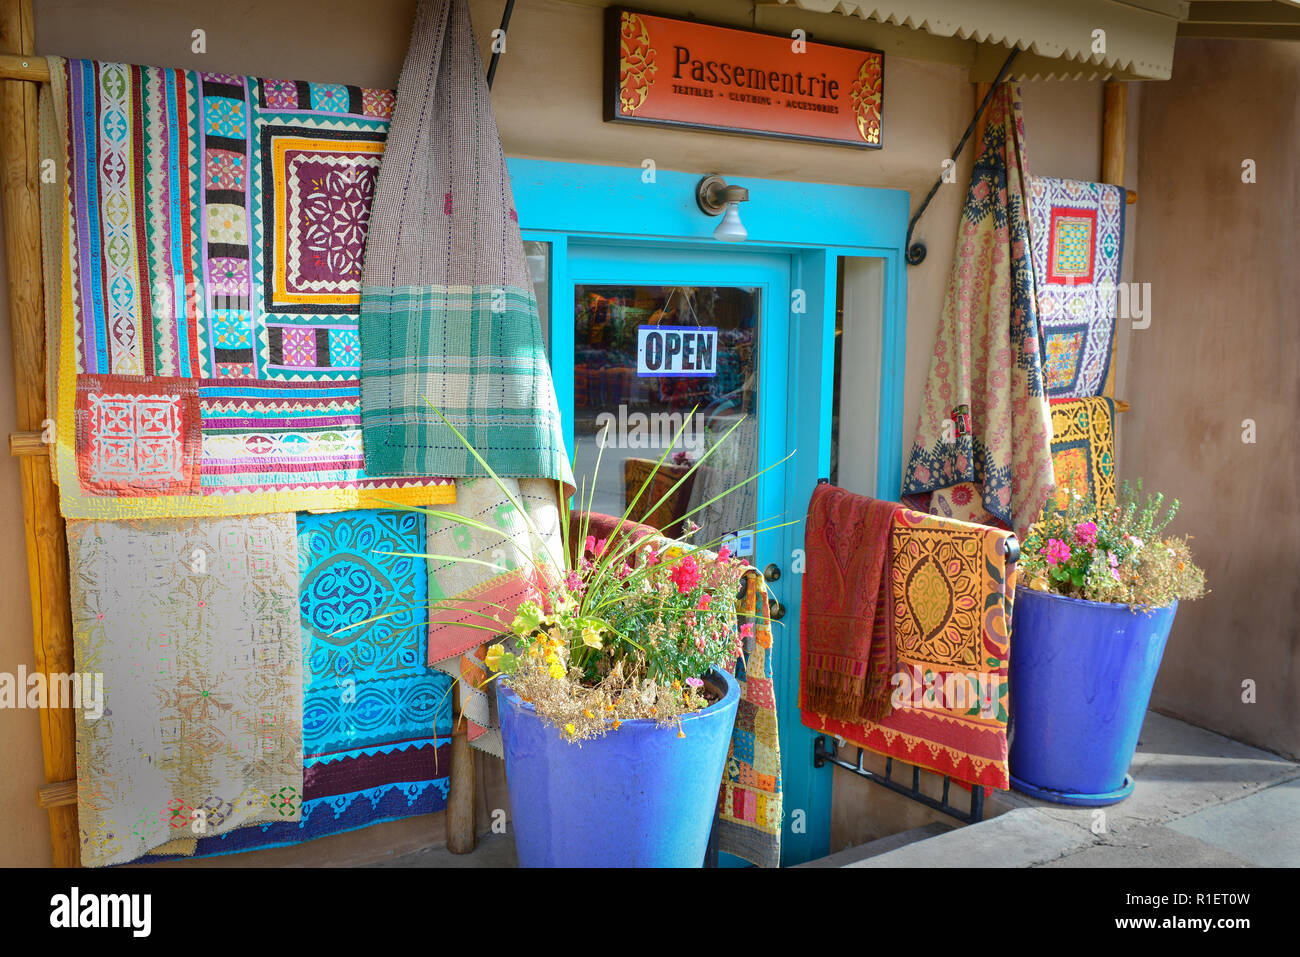 A textile shop displaying their wares outside their entrance in historic downtown Santa Fe, NM Stock Photo